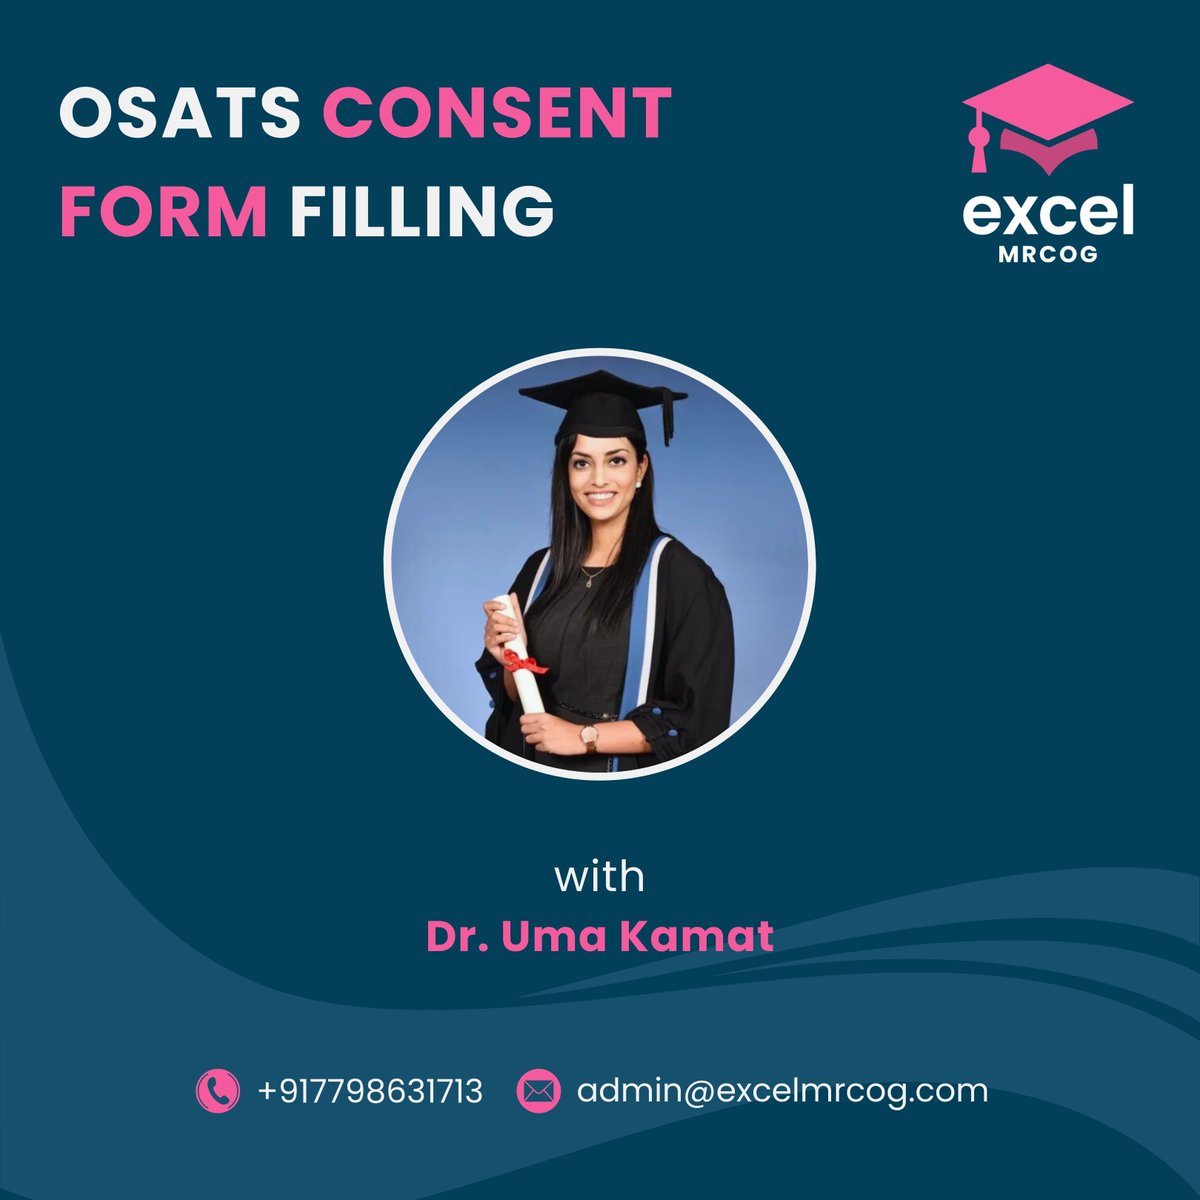 Boost your exam preparation to new heights with this comprehensive and insightful video 💯 

Click the link for the video: buff.ly/44myPoR 

#ExamReady #GynecologyStudies #VirtualLearning #OnlineEducation #StudyTips #StudentLife #Medicalschool #Medlife #MedSchoolLife